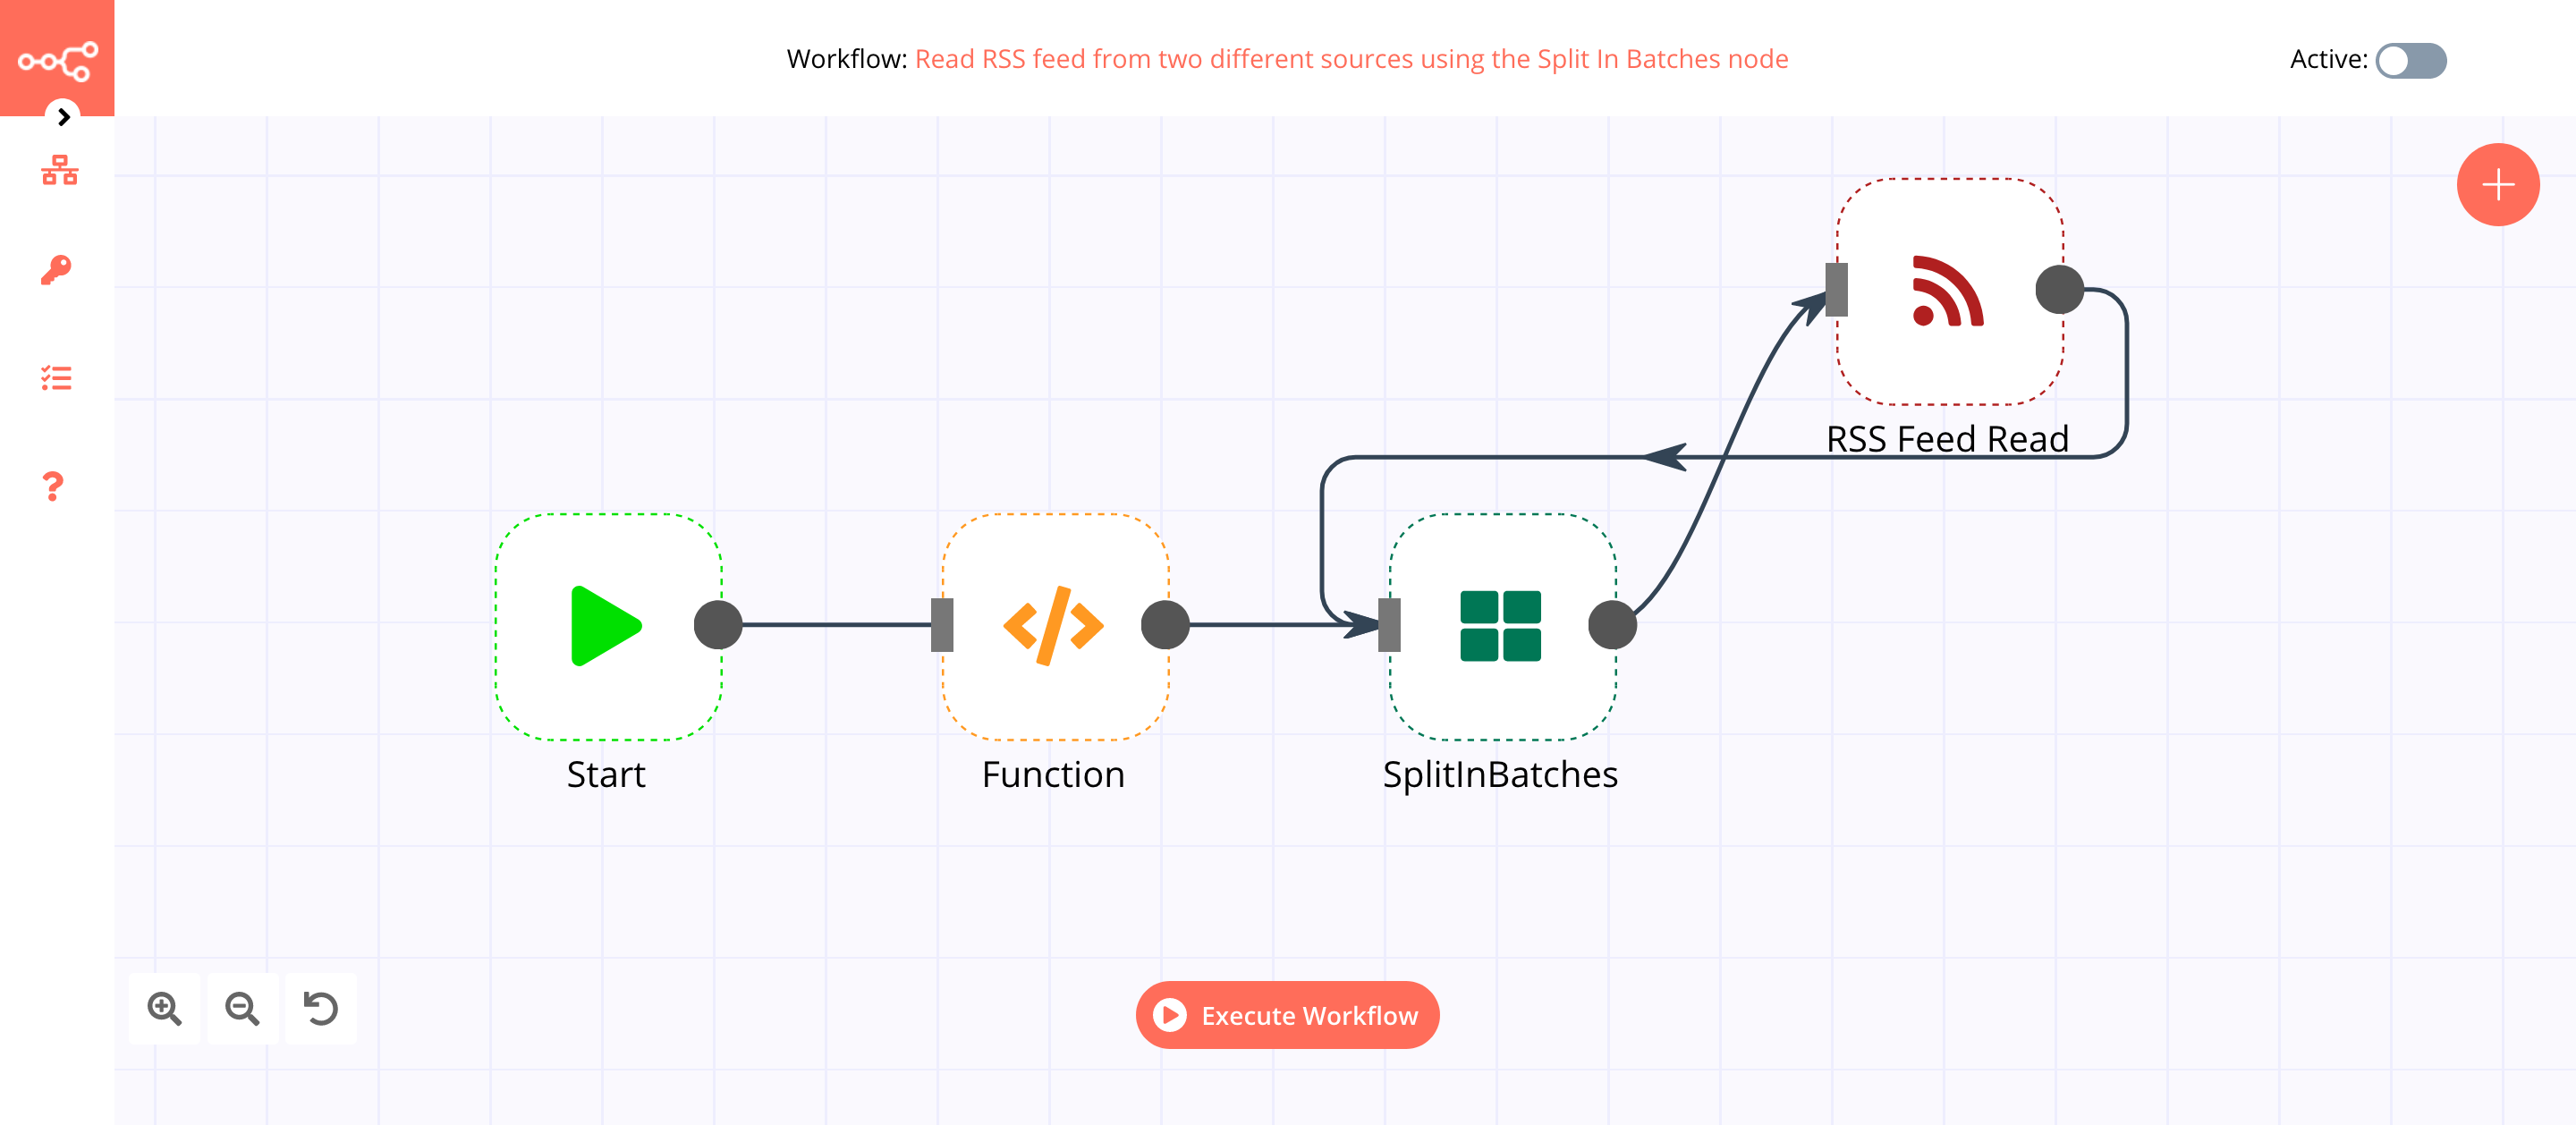 A workflow with the Split In Batches node